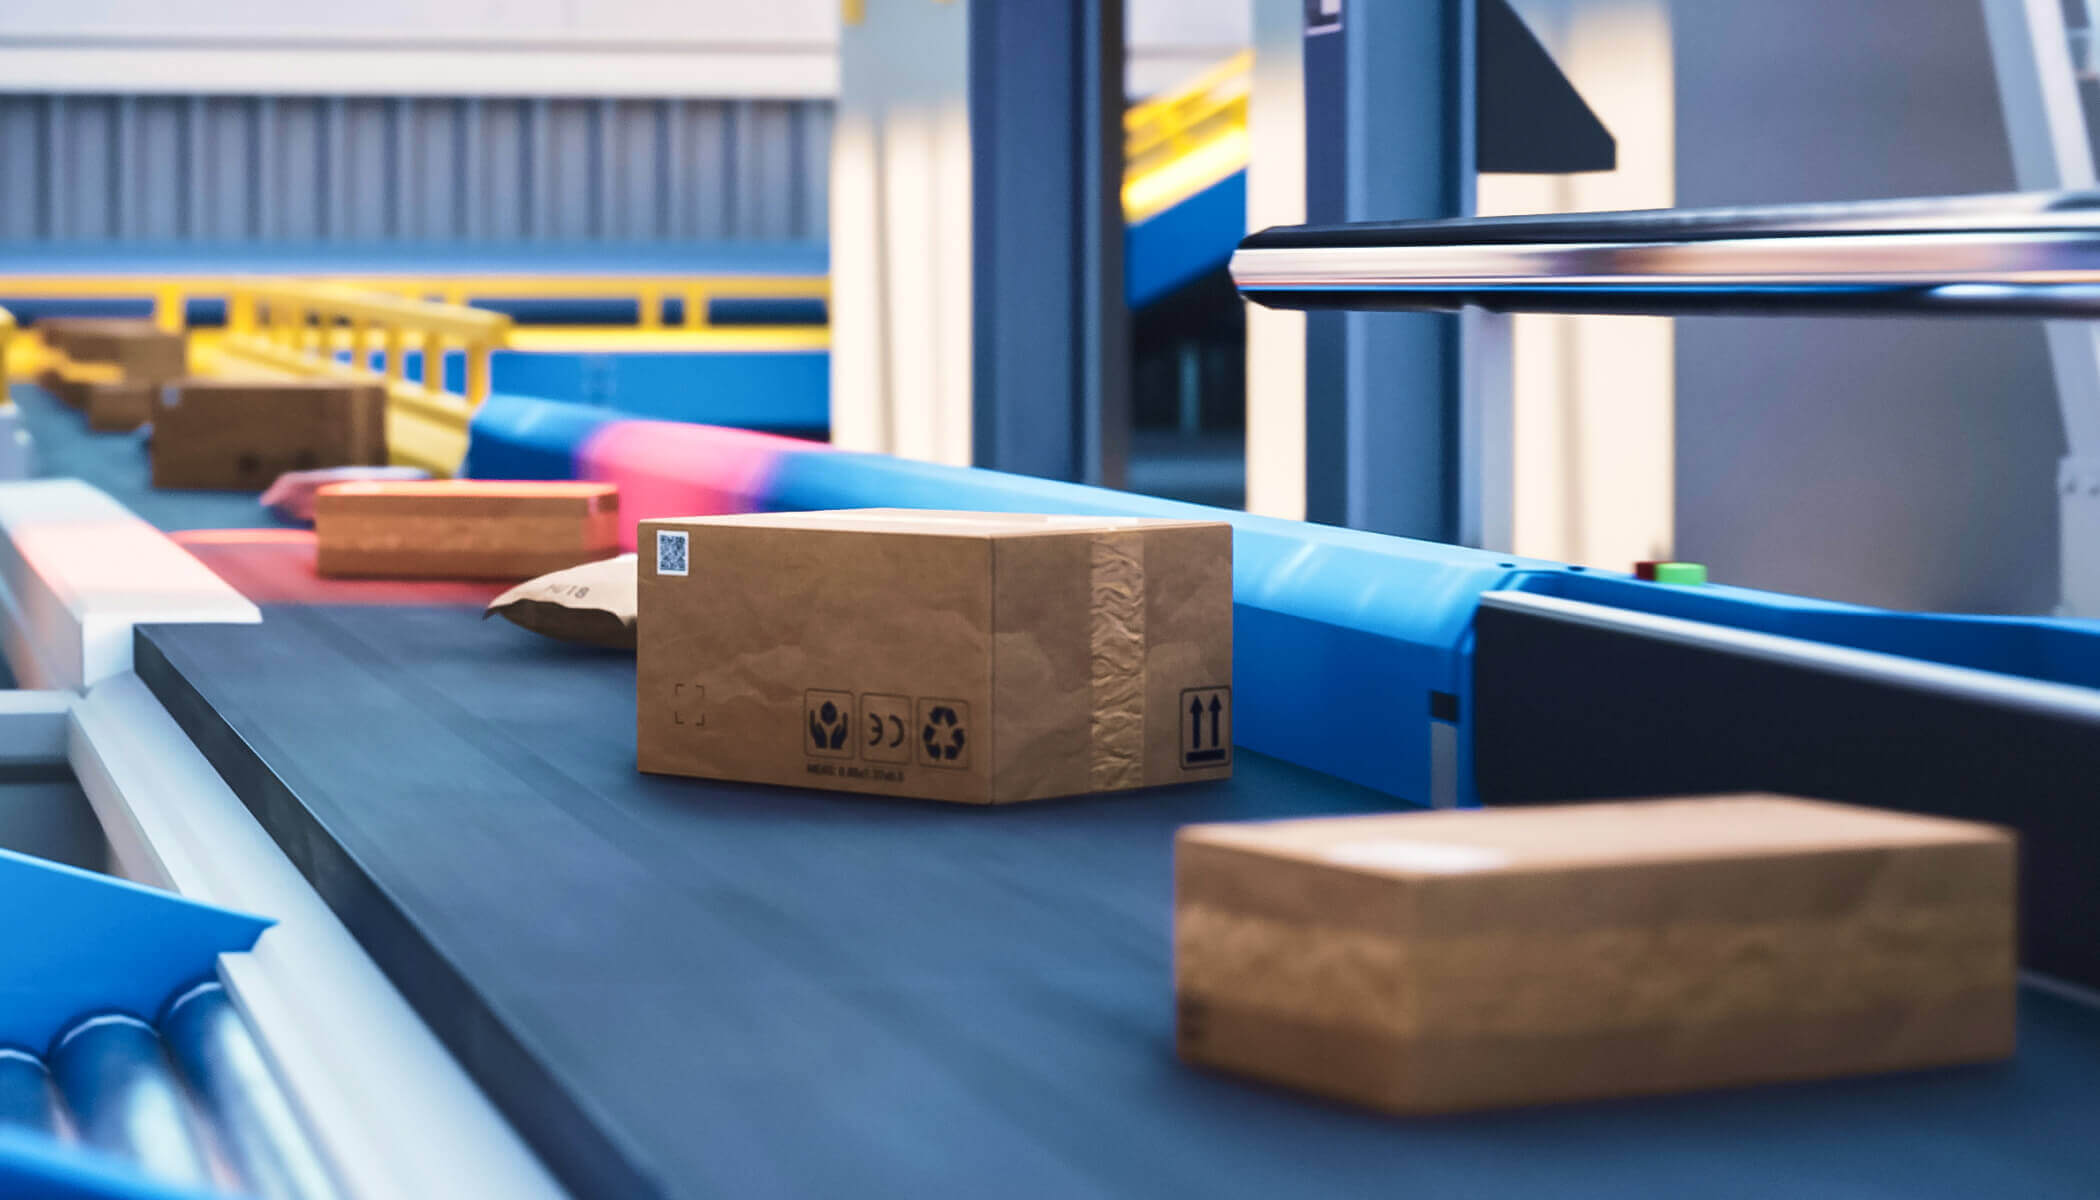 A cardboard box marked with a barcode and recycling symbol in transit on a conveyor belt within a warehouse